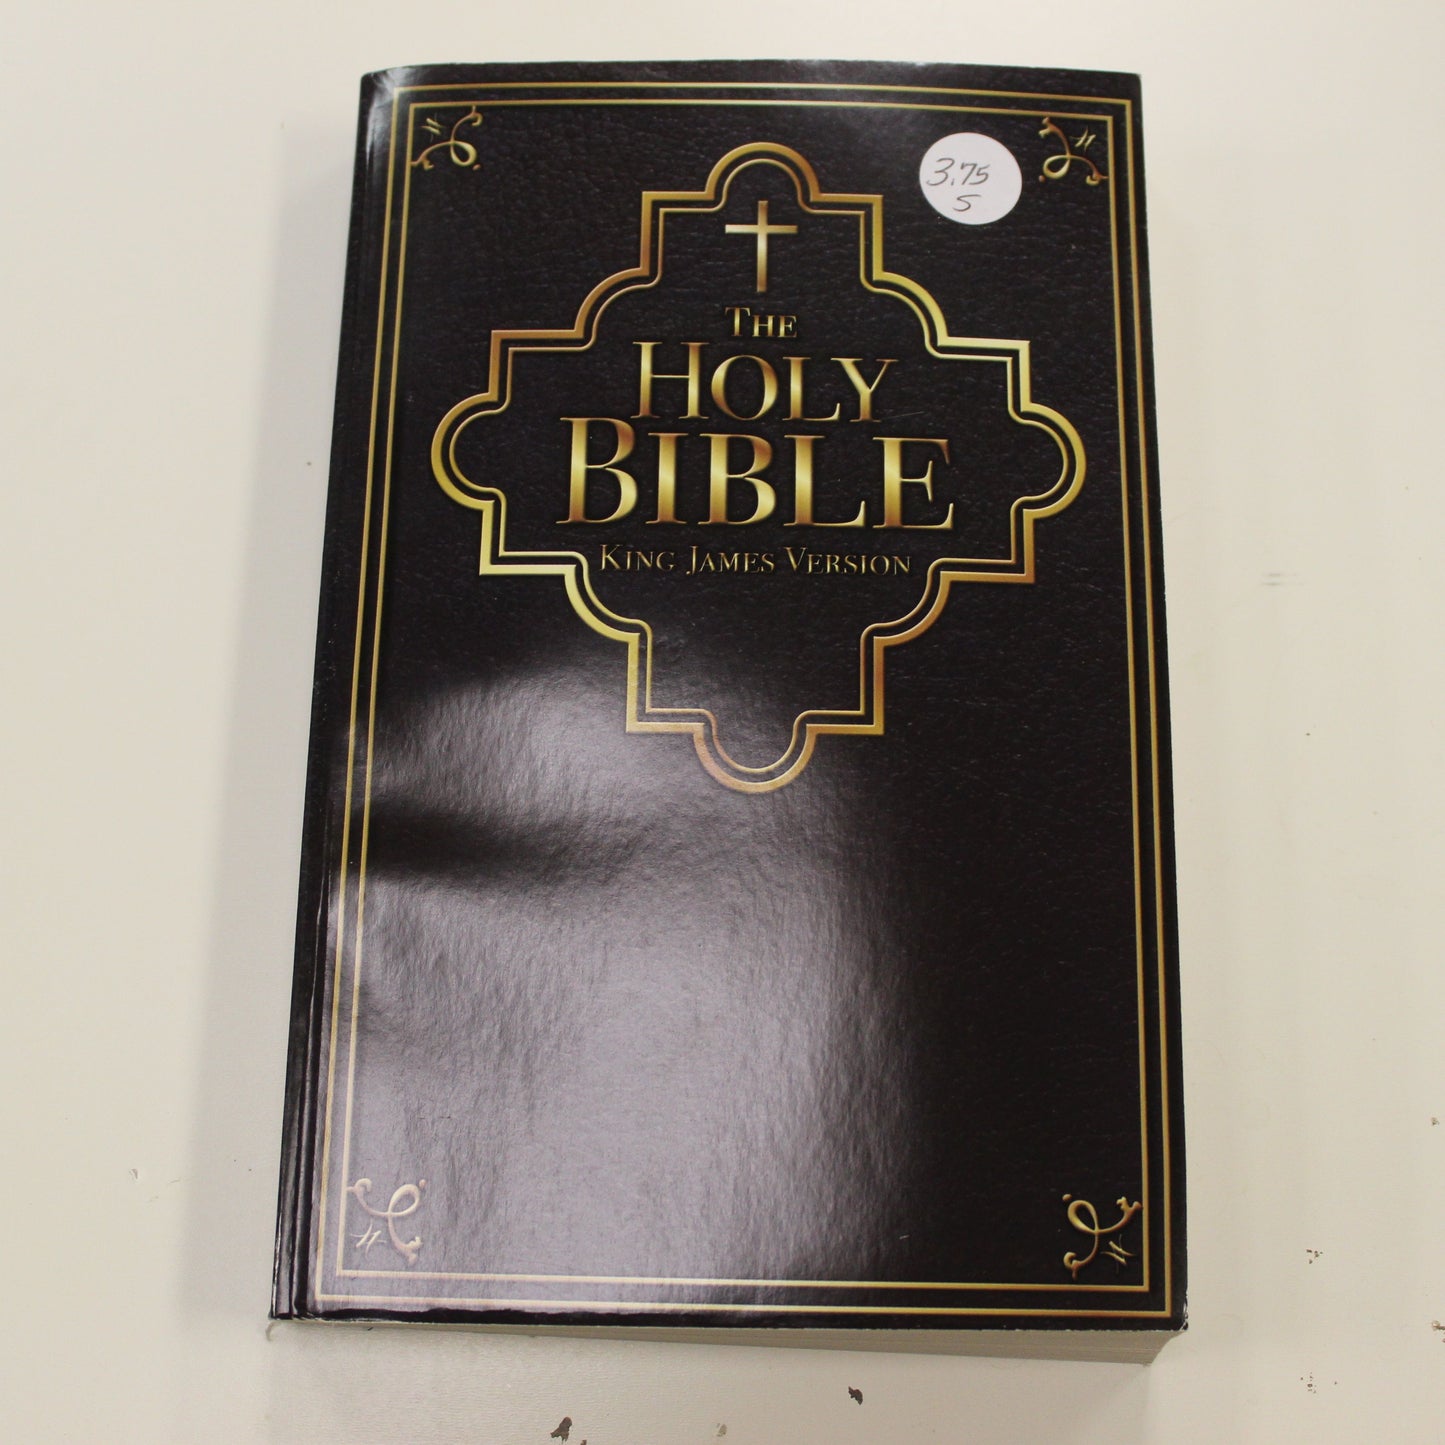 HOLY BIBLE THE NEW KING JAMES VERSION